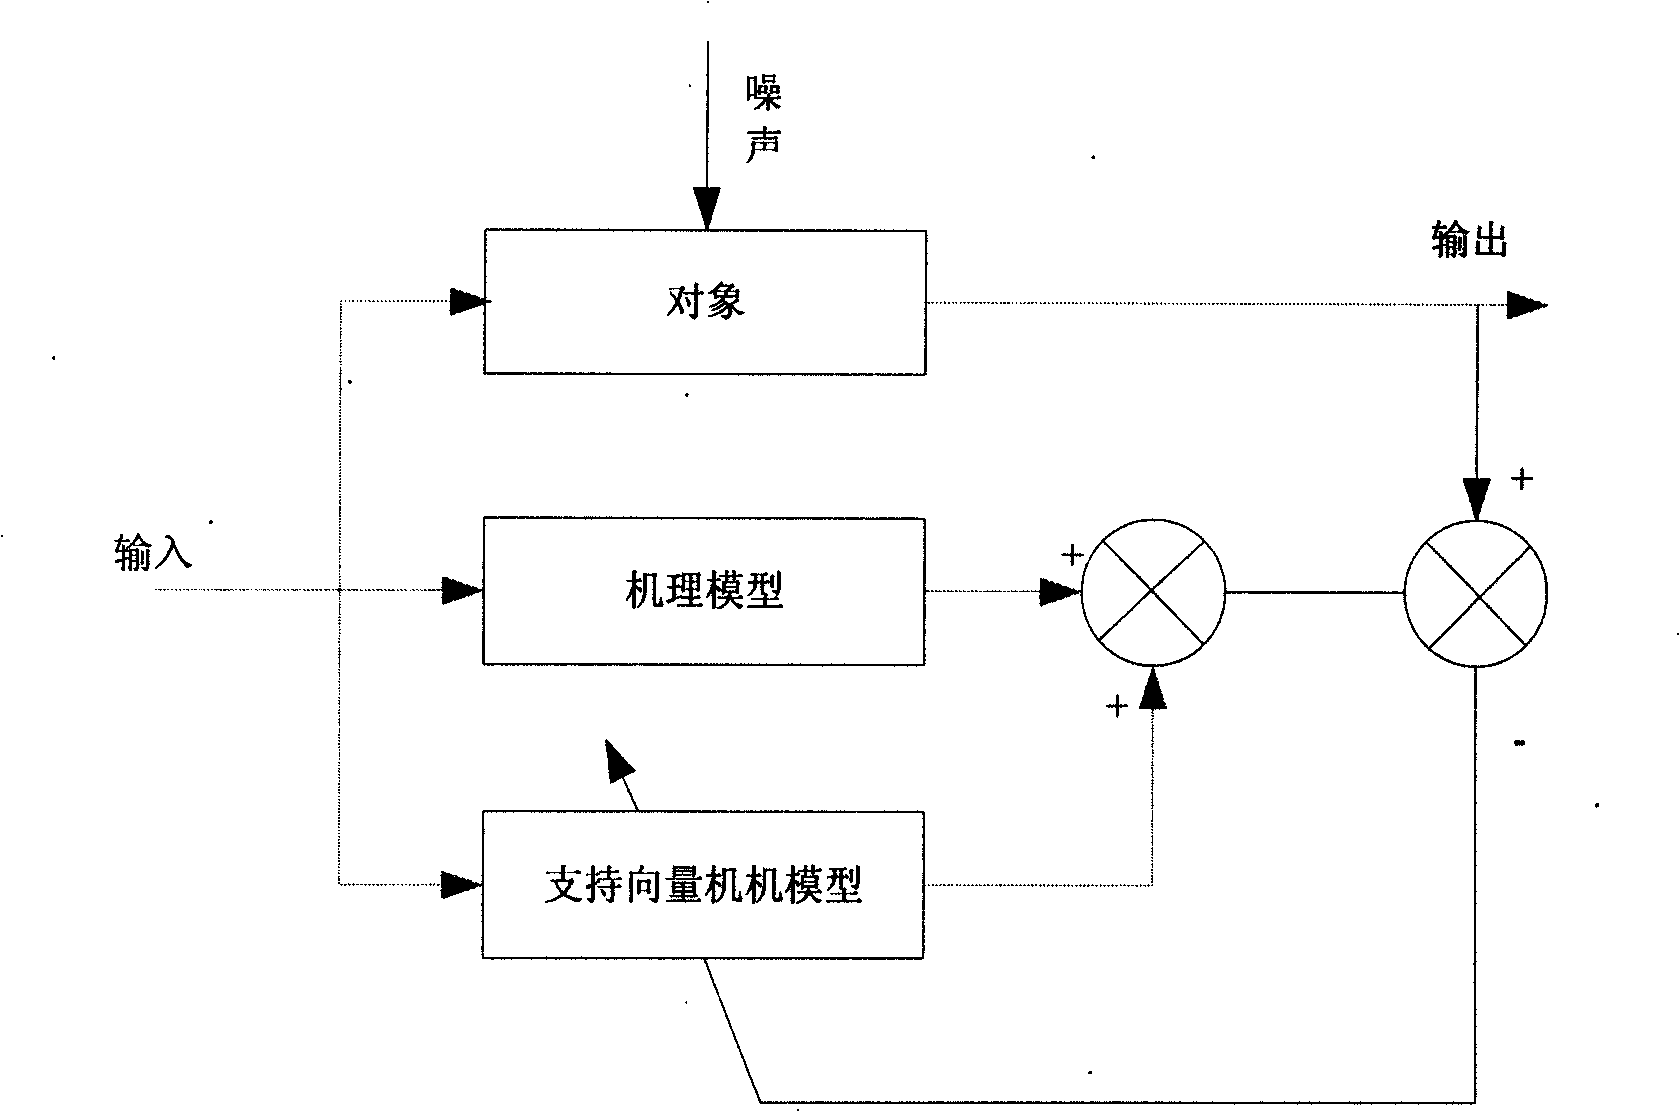 Leaching rate prediction and optimization operation method in wet metallurgical leaching process